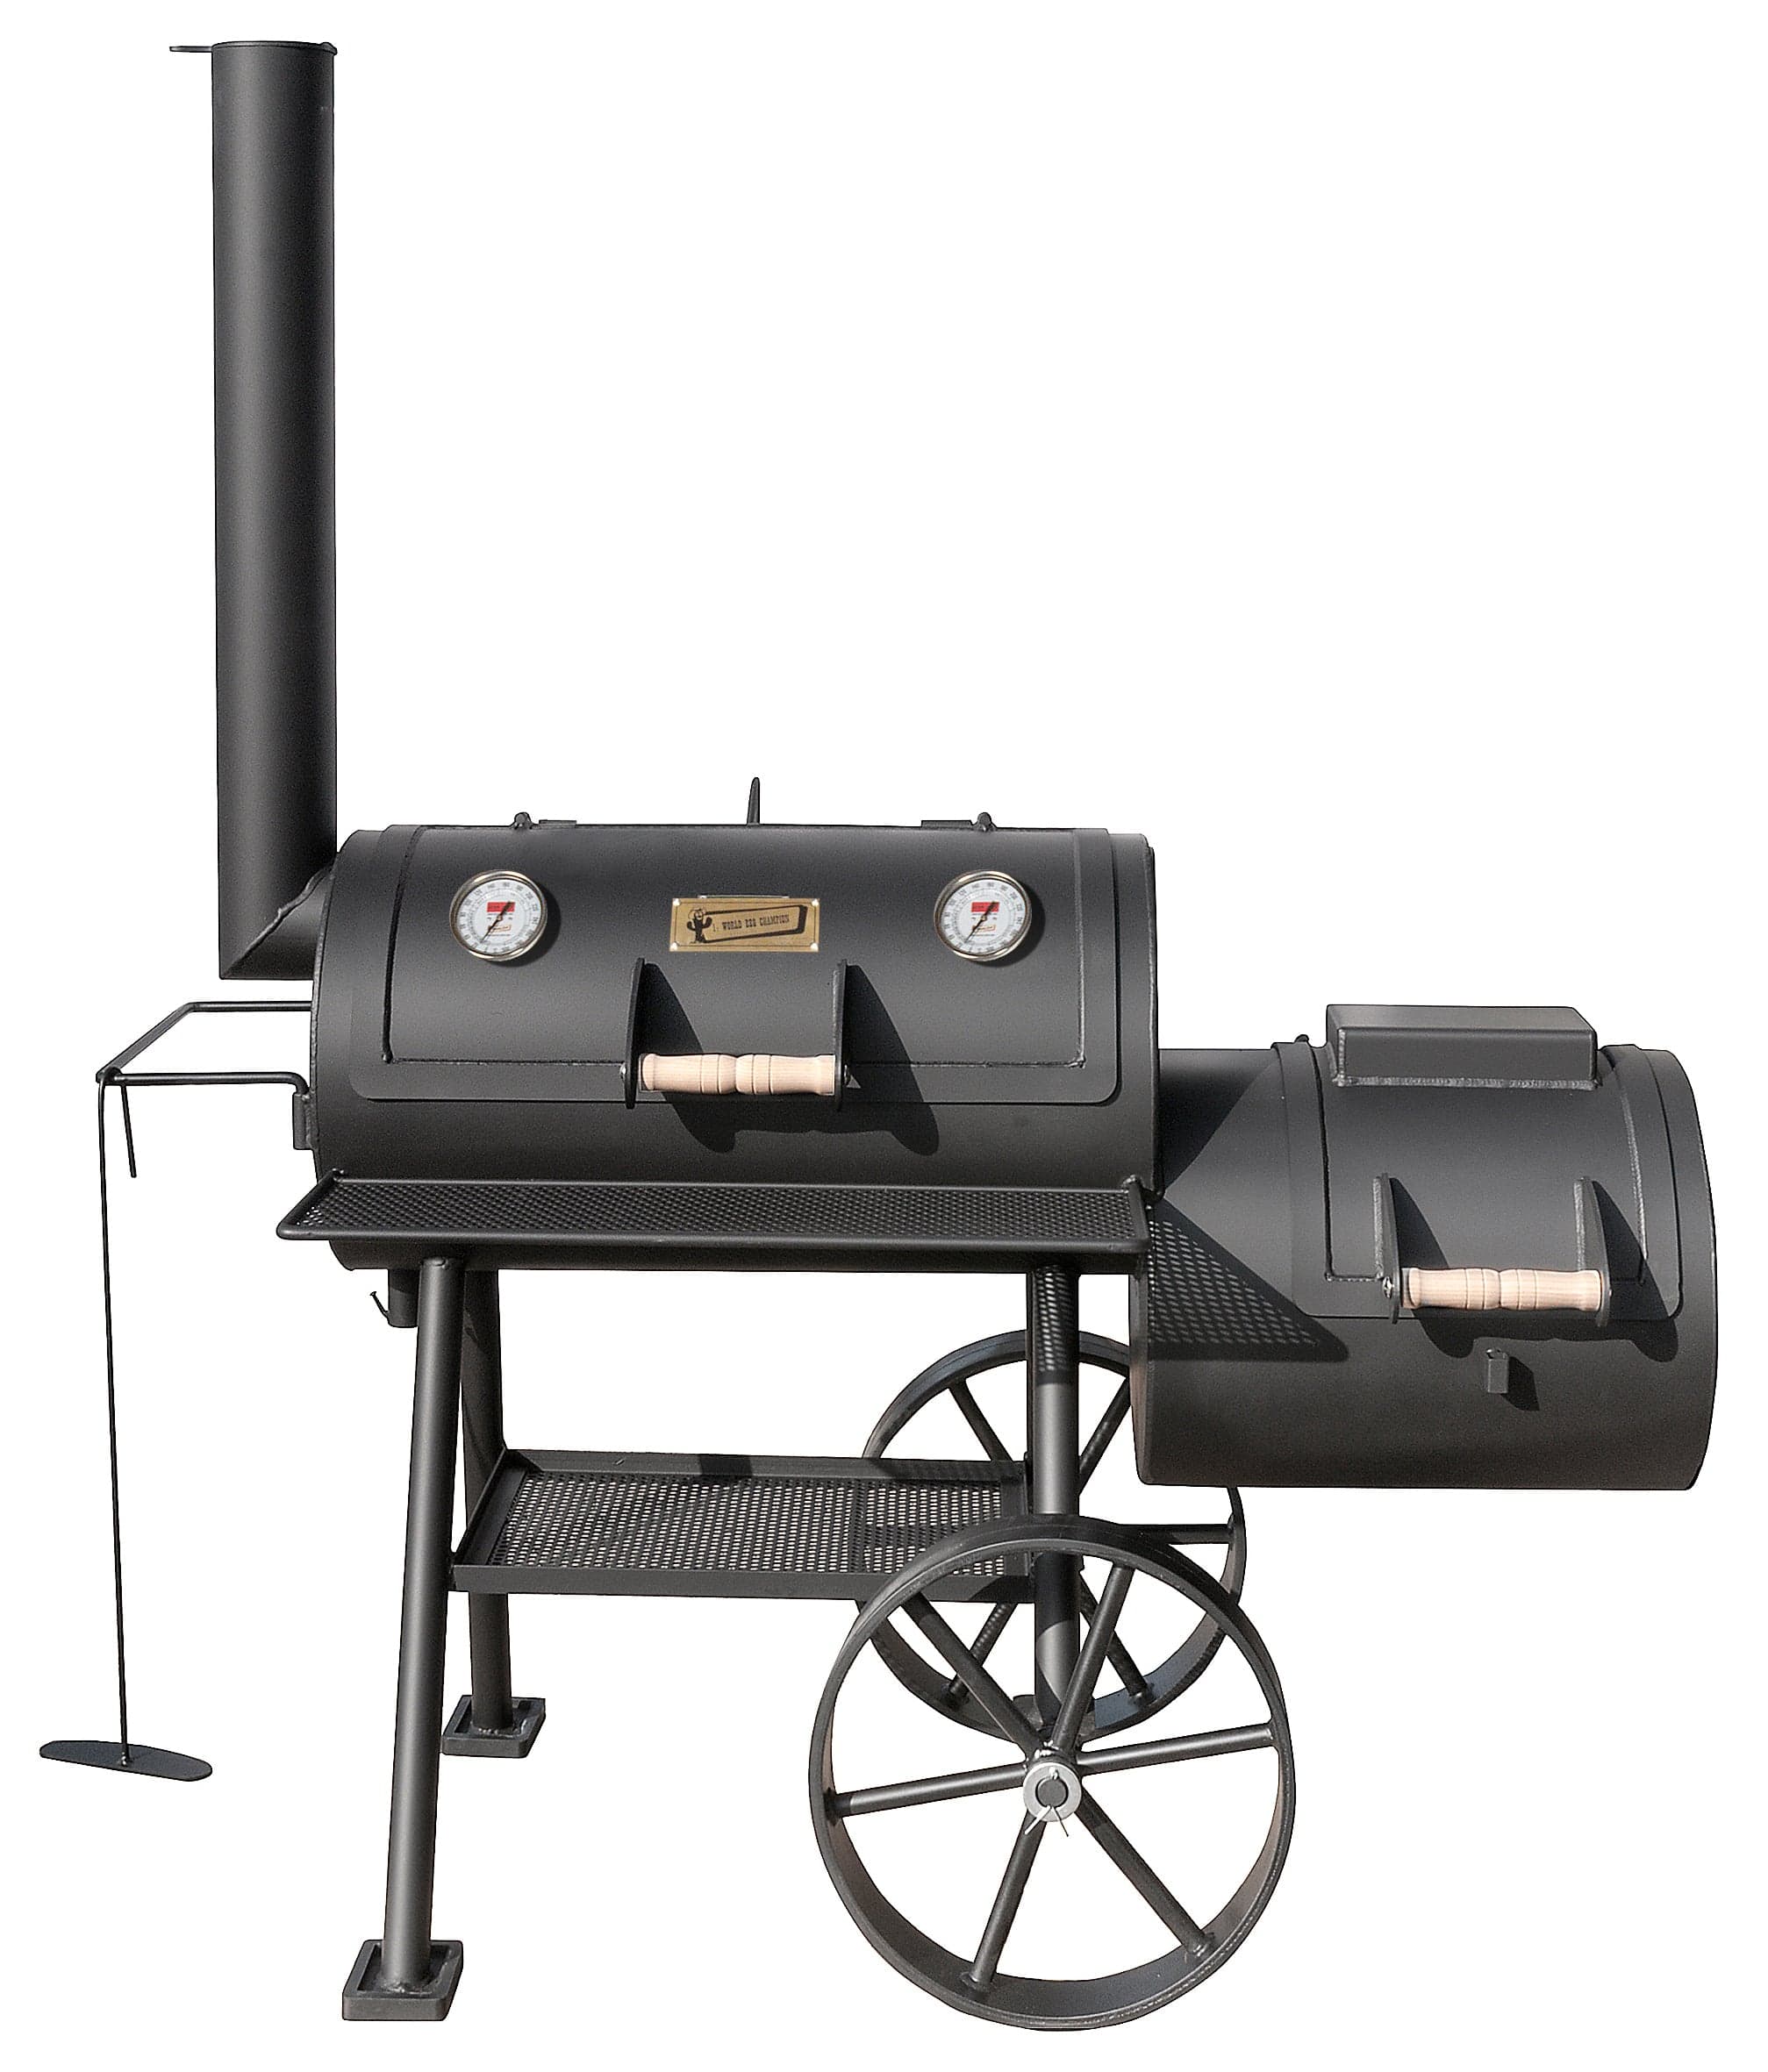 Cactus Jack 16inch Offset Smoker front